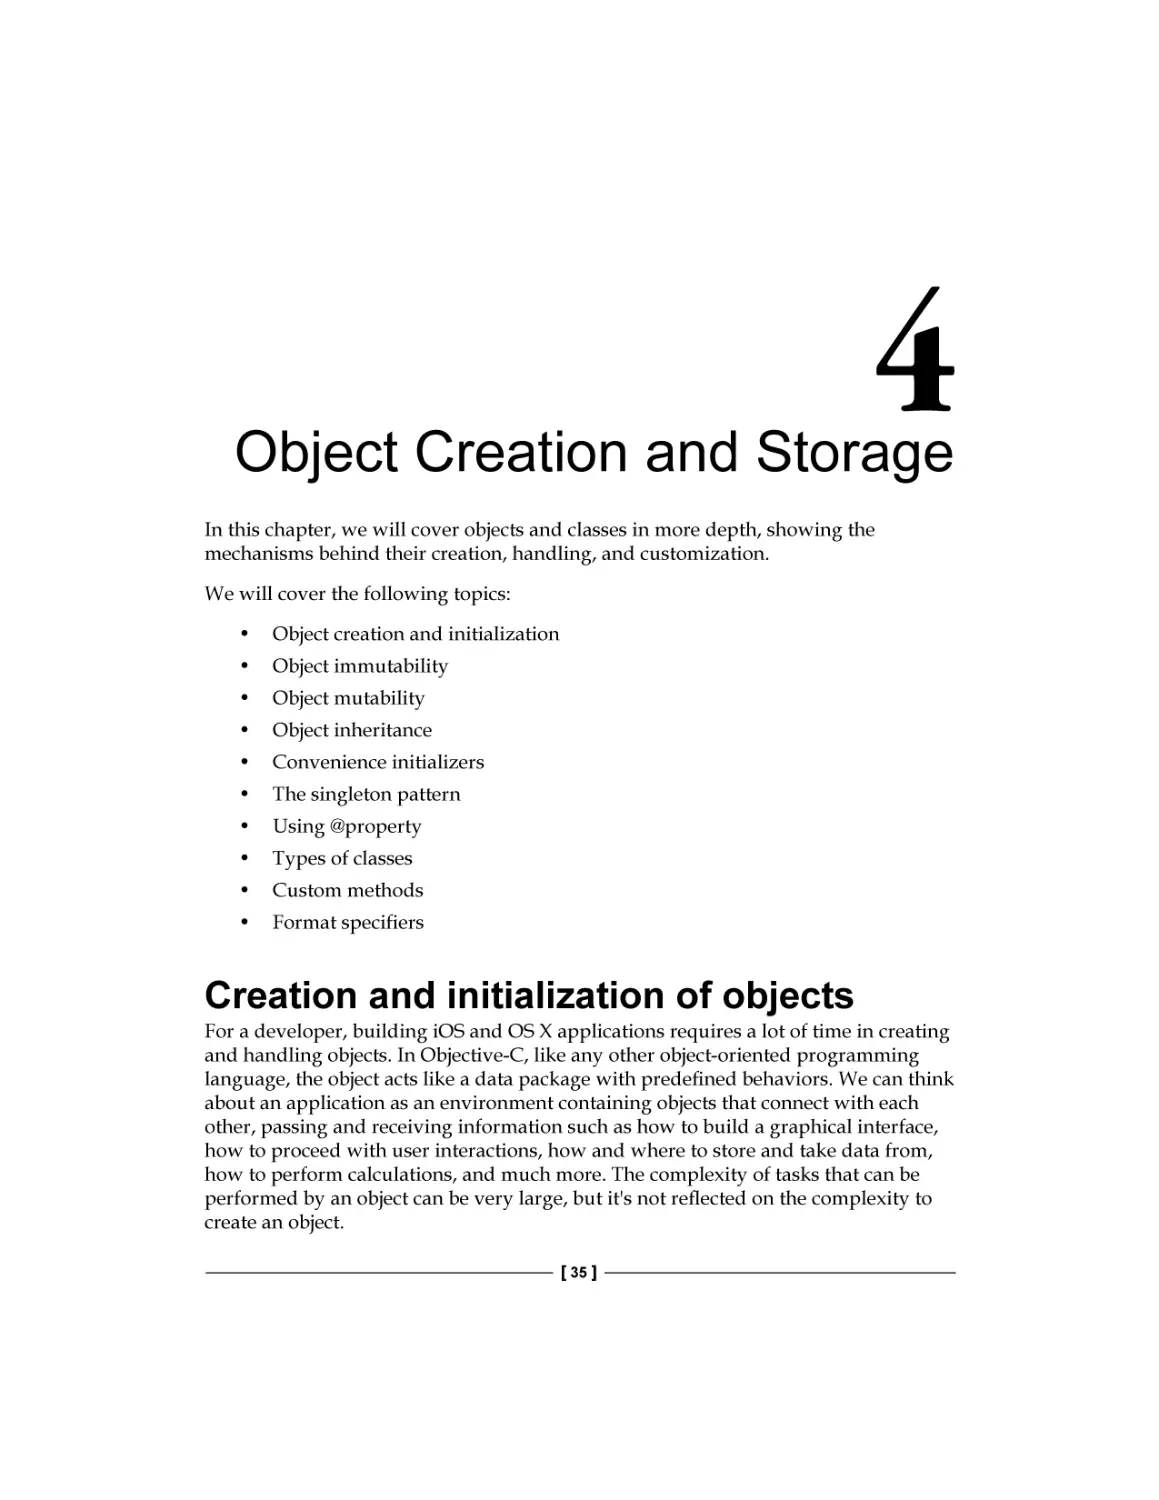 Chapter 4
Creation and initialization of objects